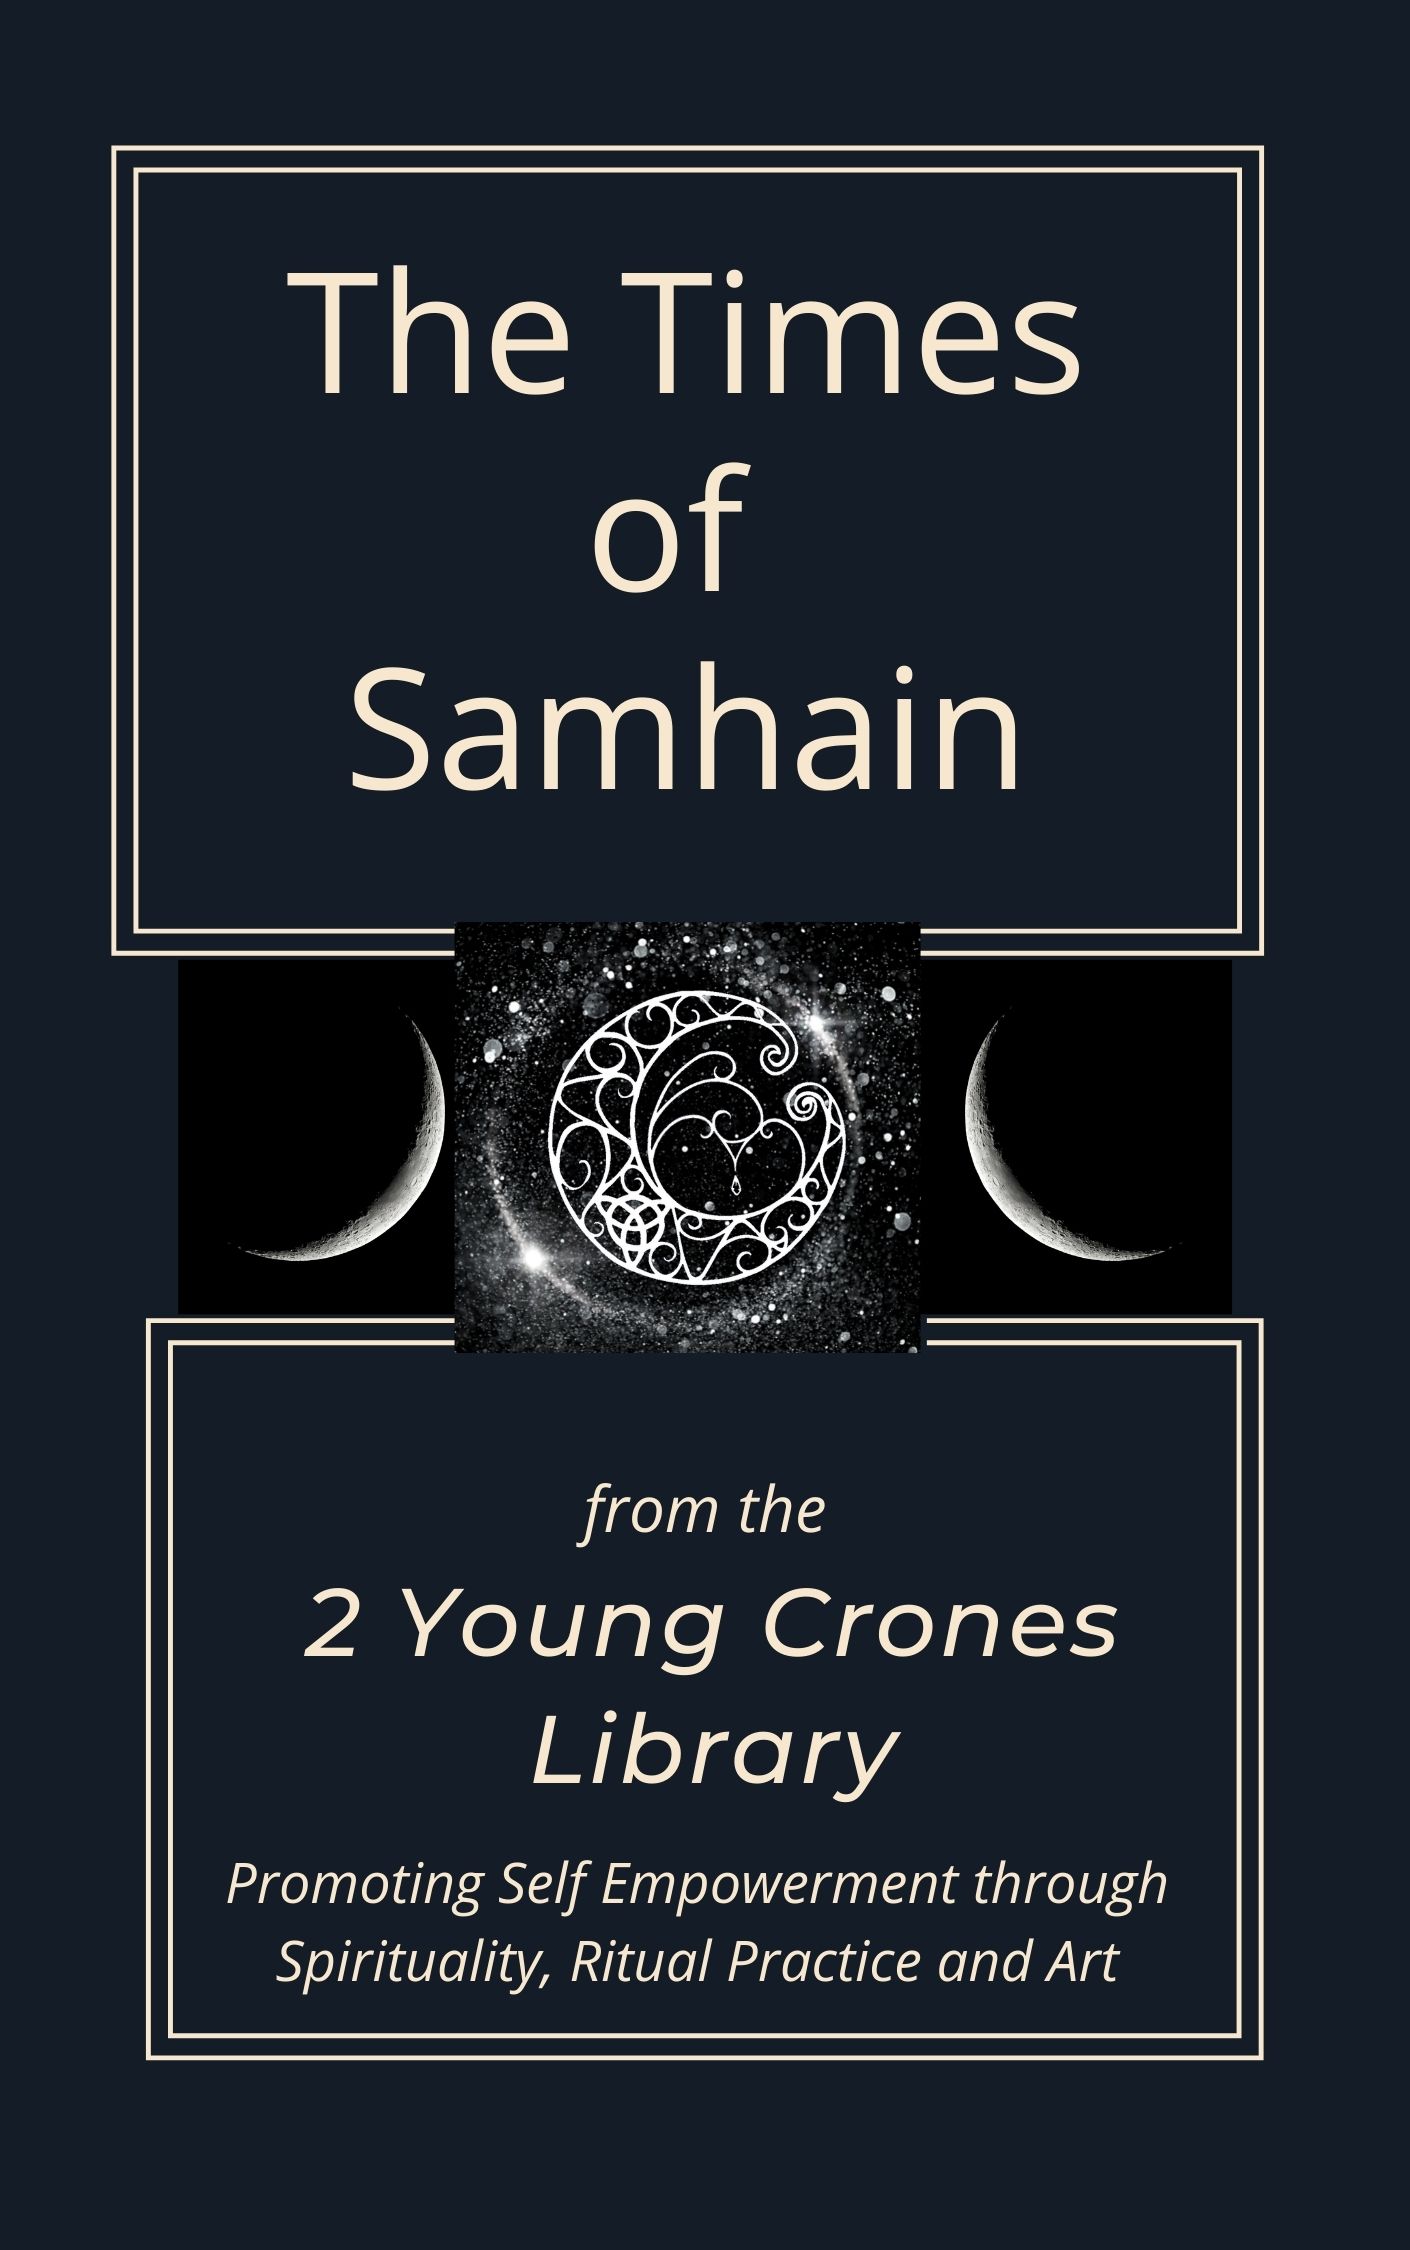 The Times of Samhain